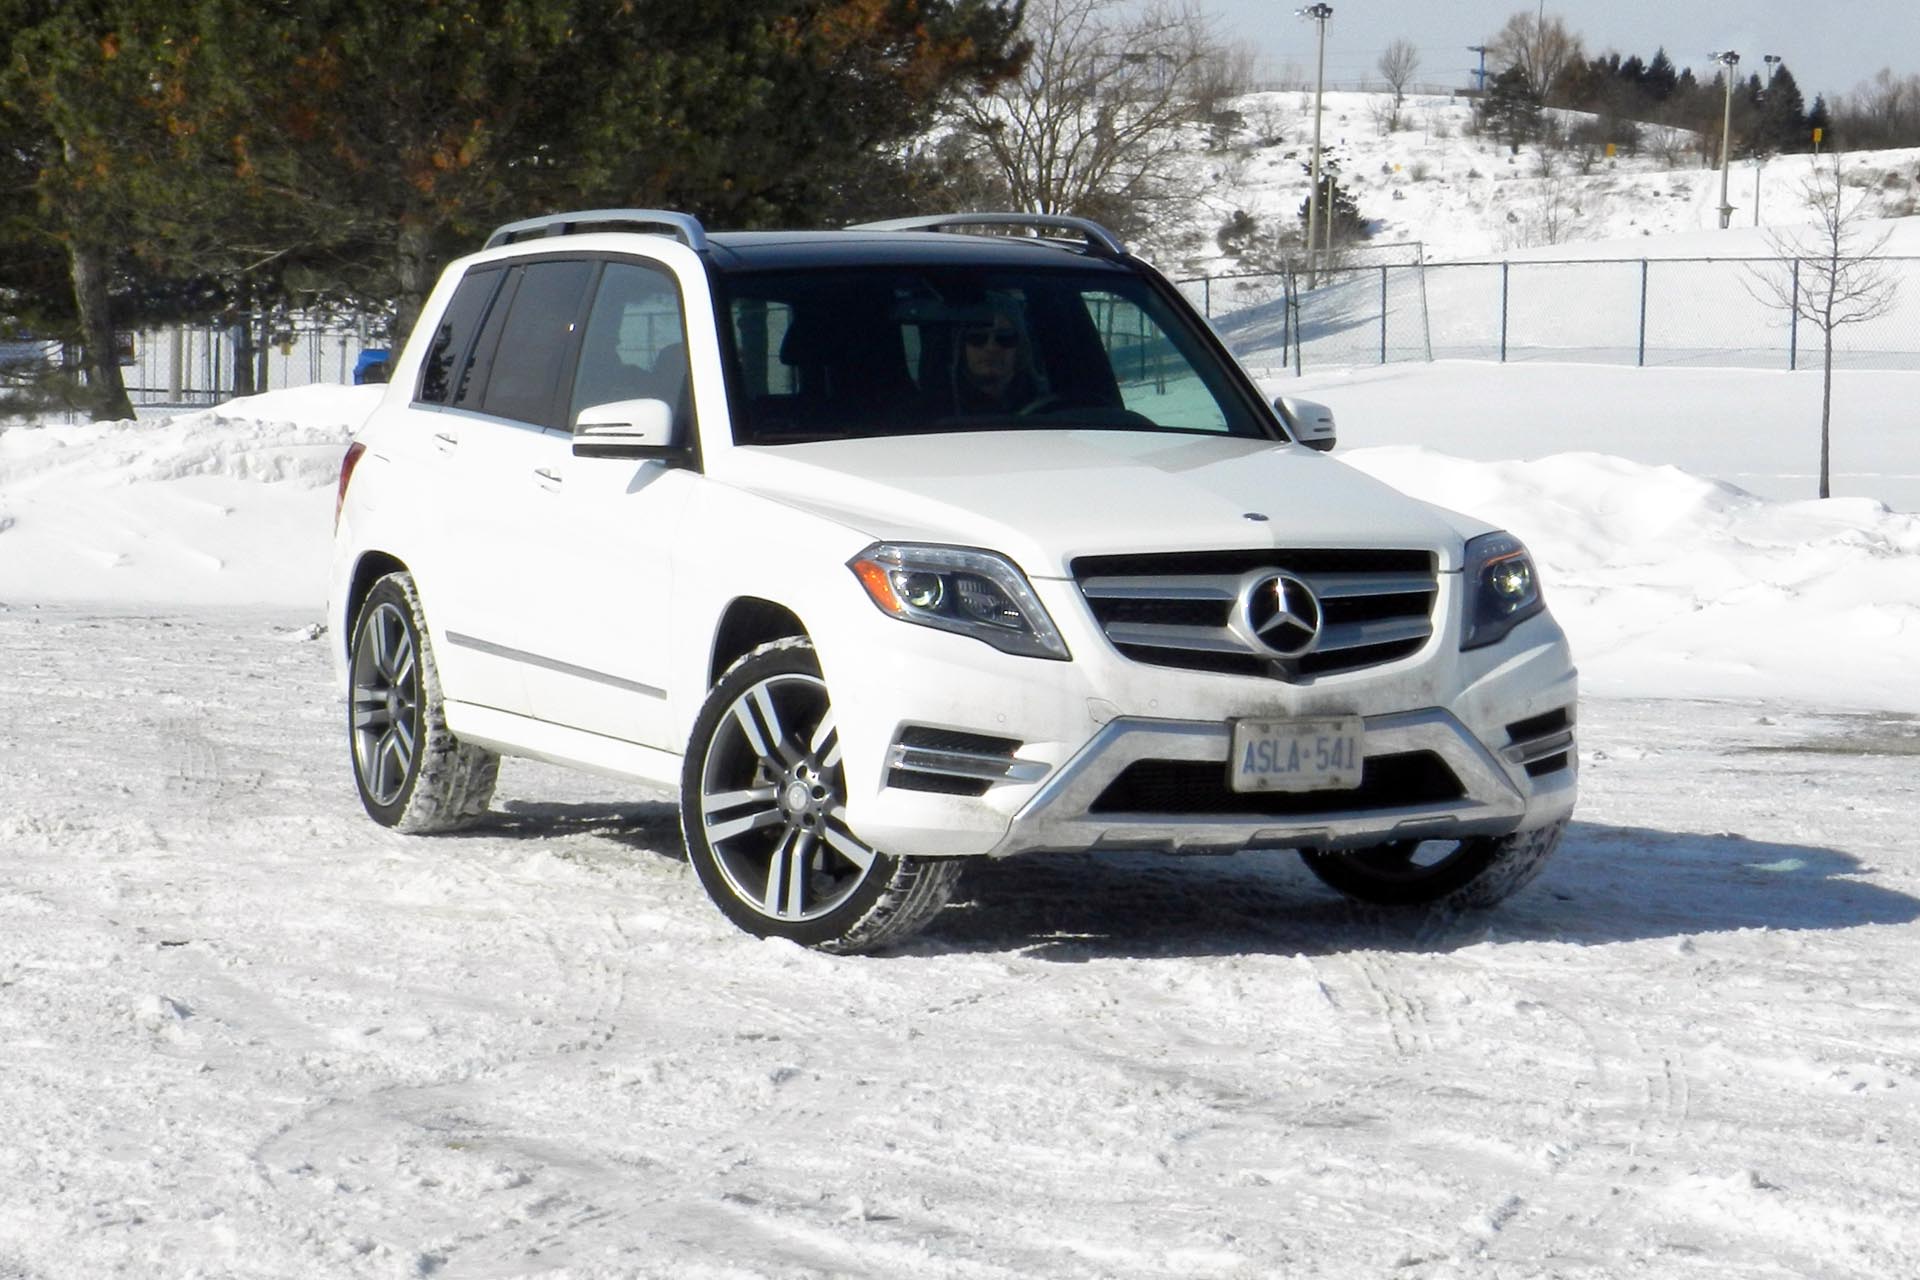 In more Mercedes news, the GLK-Class proved it still has the chops, pulling in 1,065 sales so far this year and earning a place in the top five. Both the 2.3L turbo diesel and aggressive shape help lots here. The GLK will be renamed the GLC come the end of the year to reflect its relative position. But I’d bet it will arrive as an all-new vehicle using the award-winning C-Class as its base.